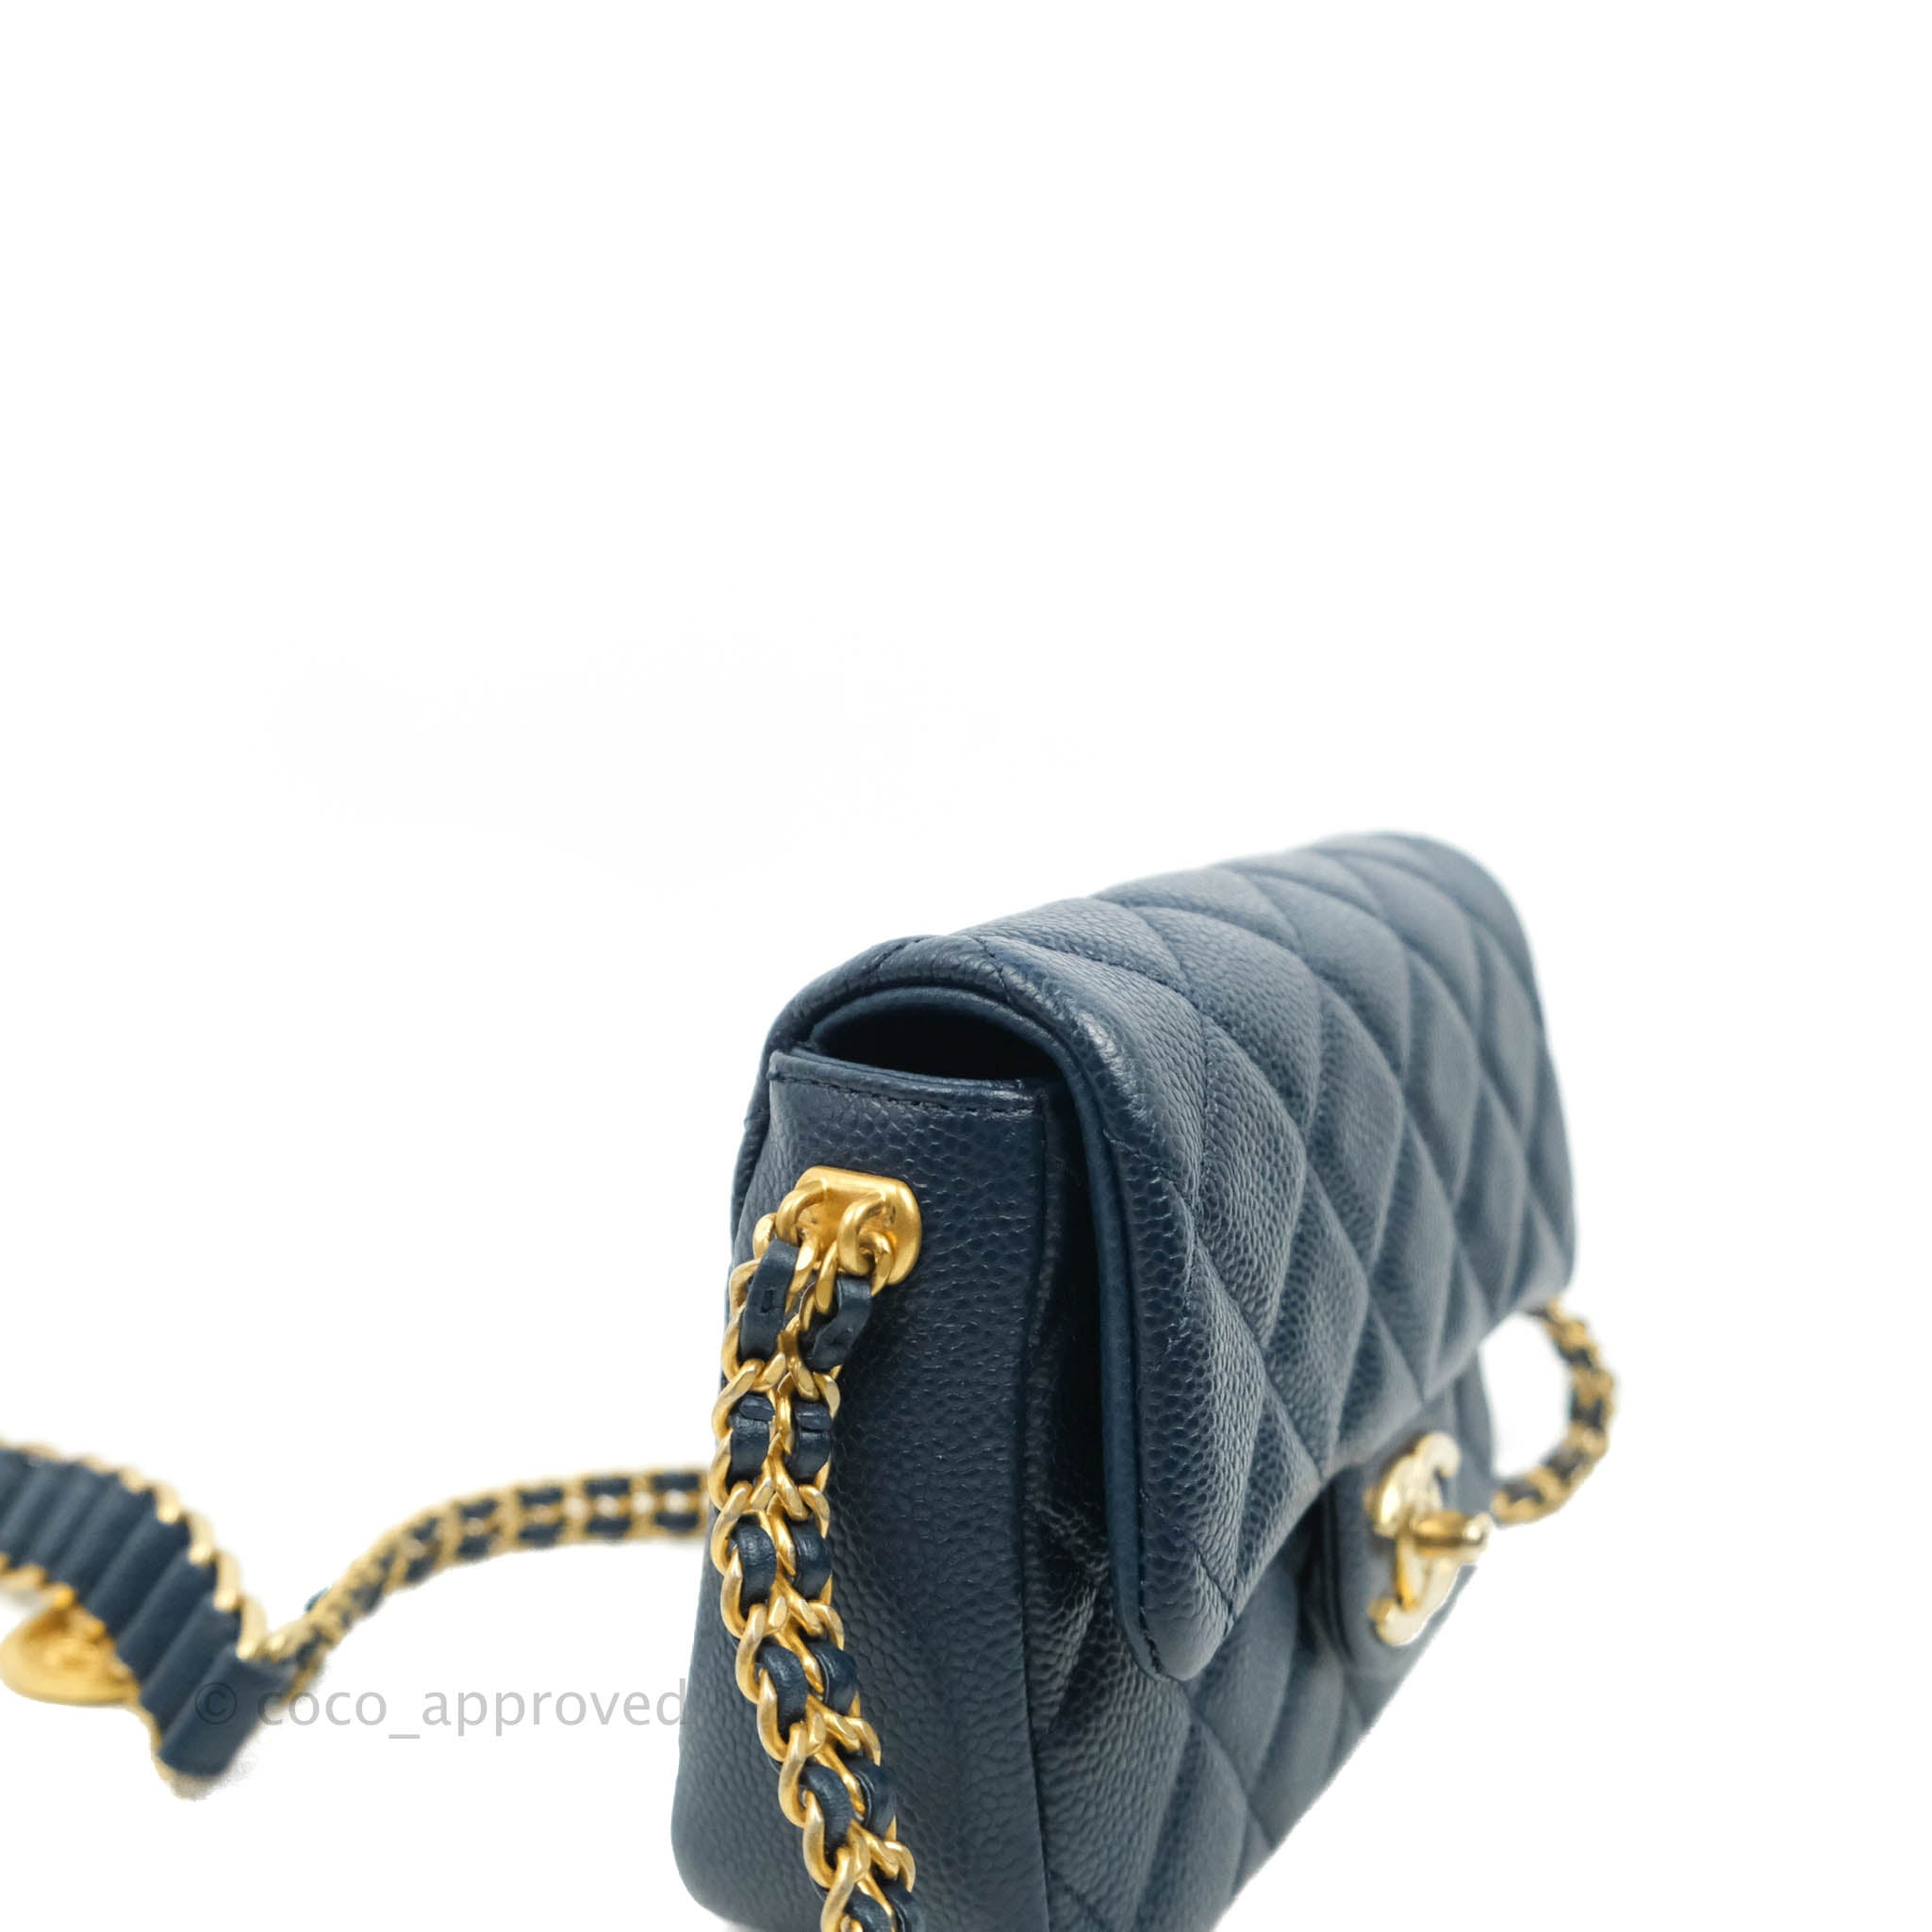 50 More Photos That Prove Chanel Bags are the Reigning Celebrity Favorites  - Page 51 - PurseBlog